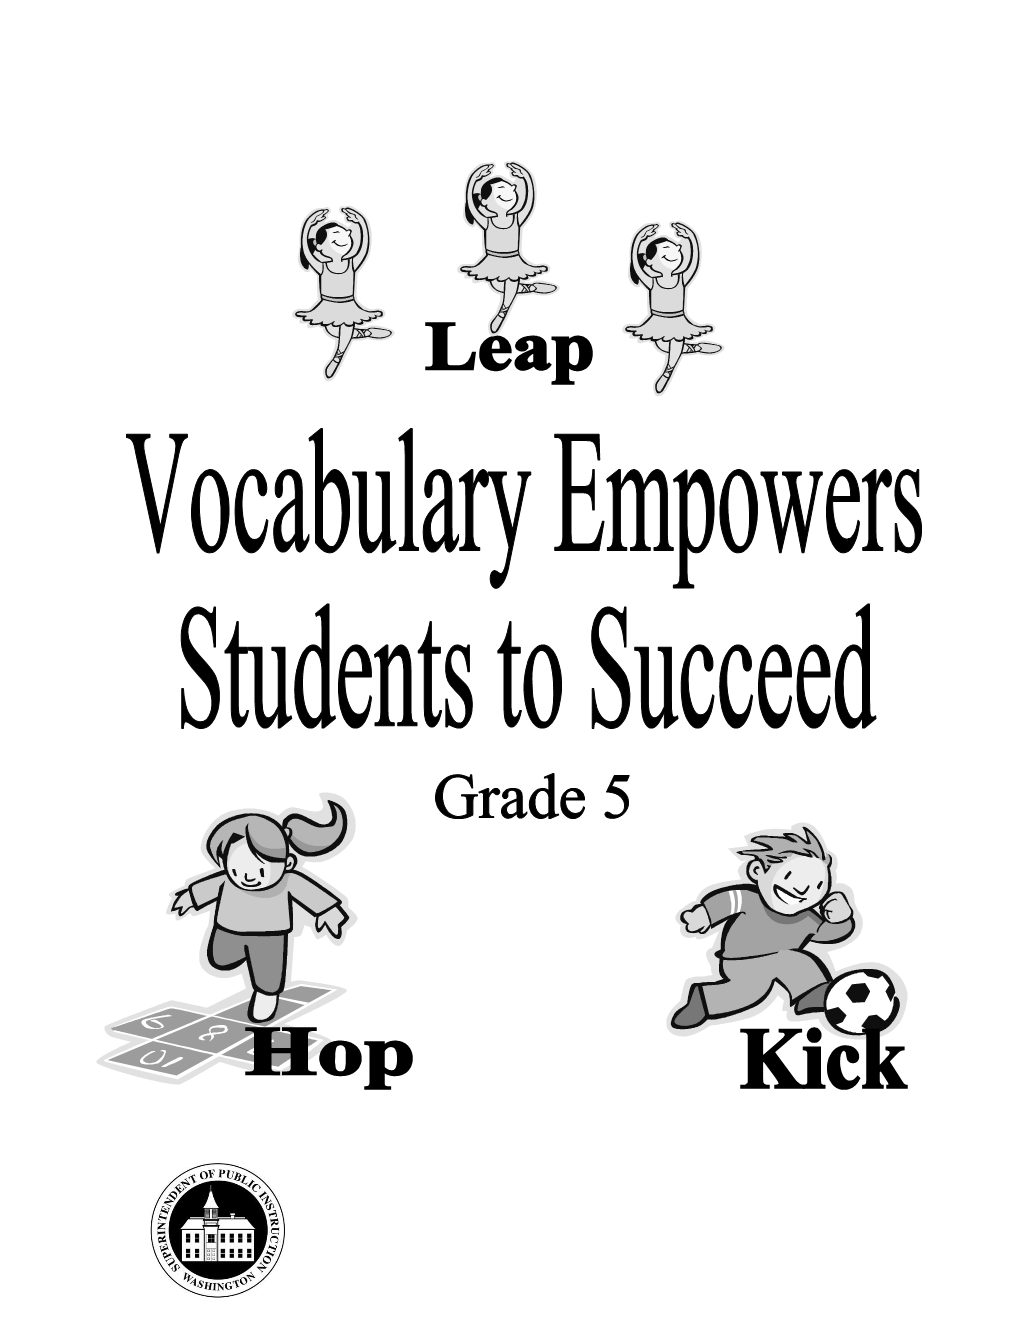 Vocabulary Empowers Students to Succeed